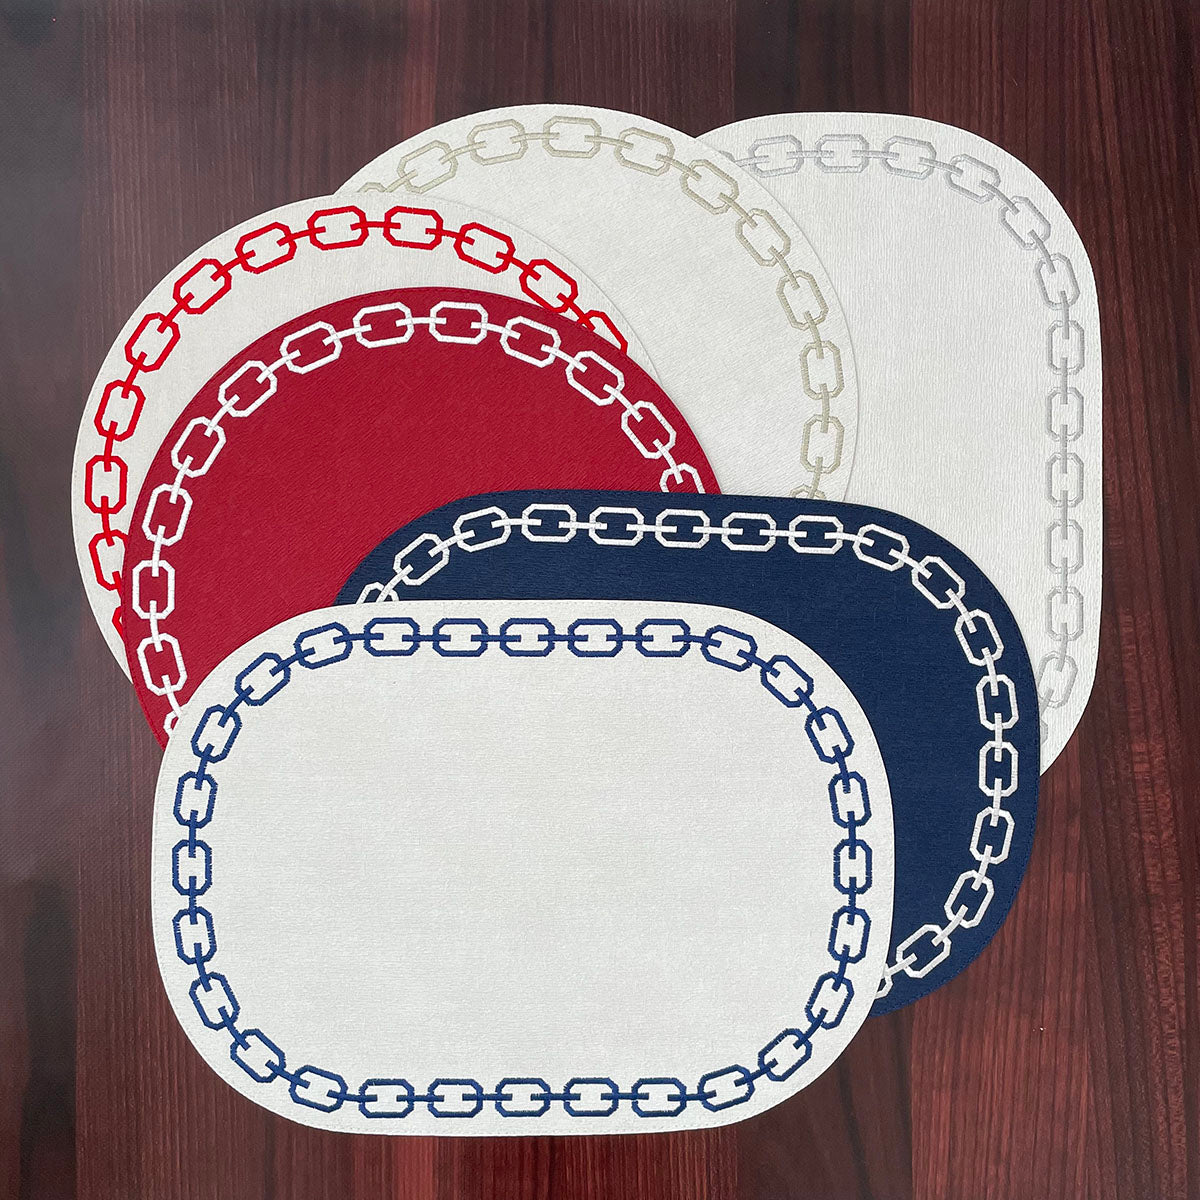 New chains placemats available in 2 different sizes and 6 fun color combinations